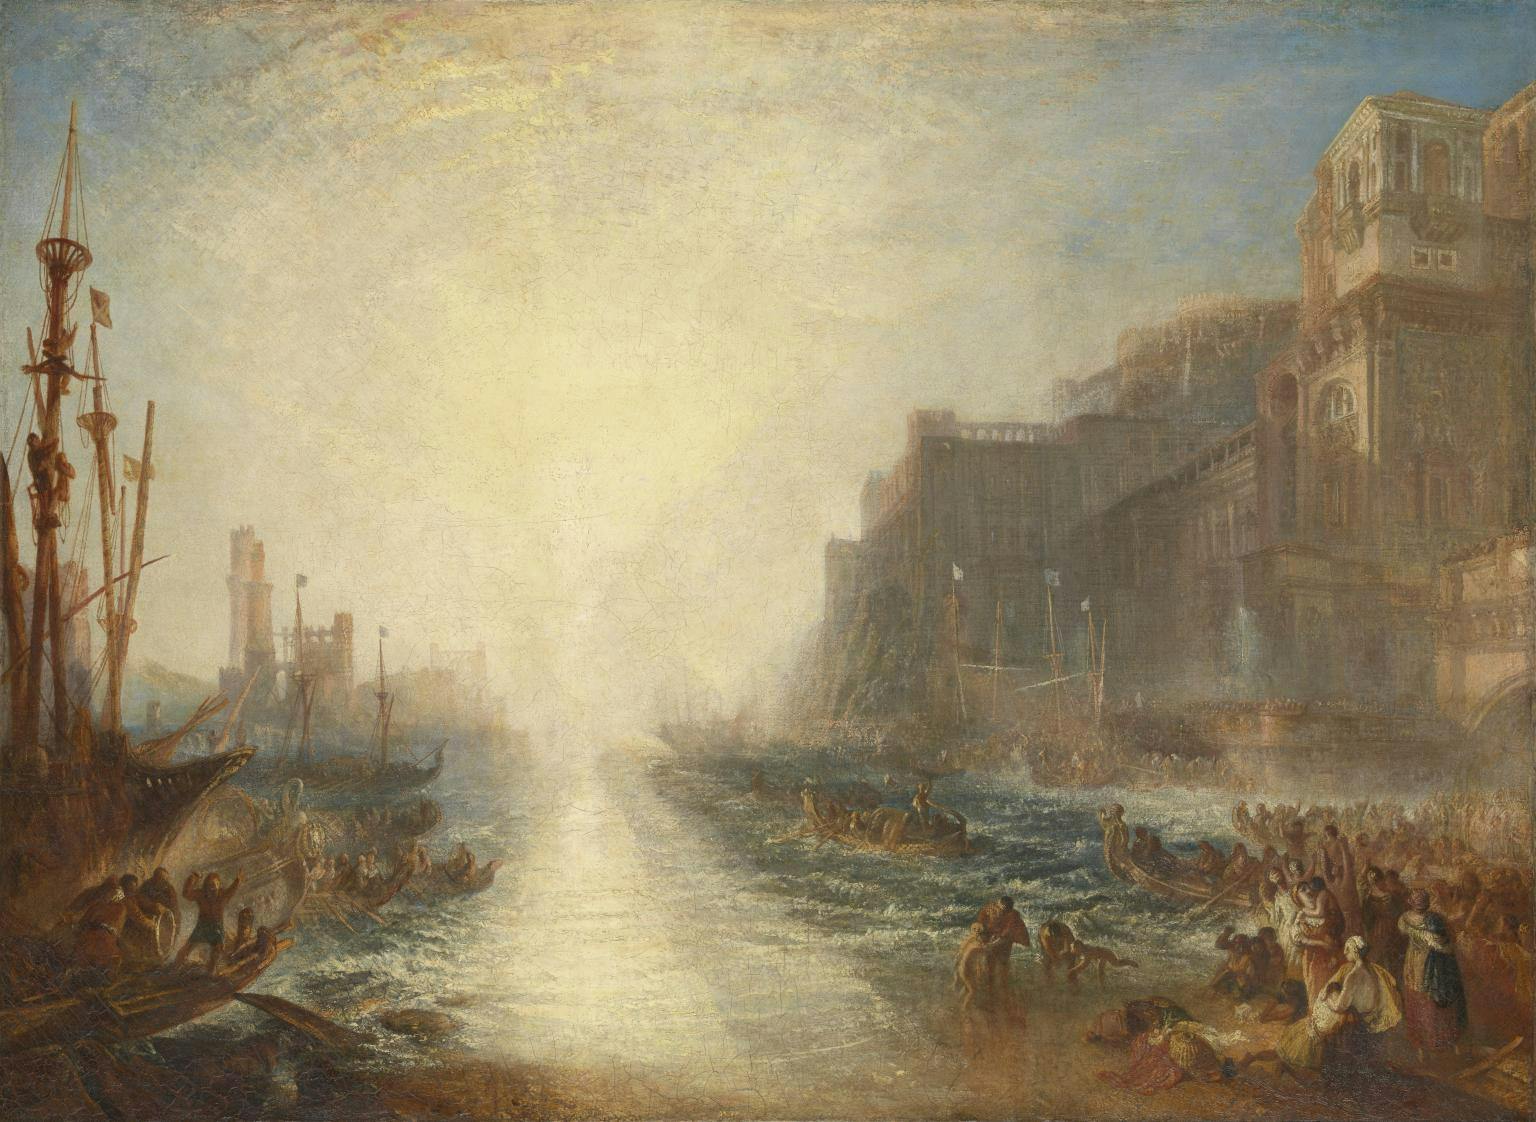 In Regulus, Turner used chrome yellow and lead white to re-create the intense experience of staring directly into the sun. Contemporary critics advised viewers to keep a safe distance